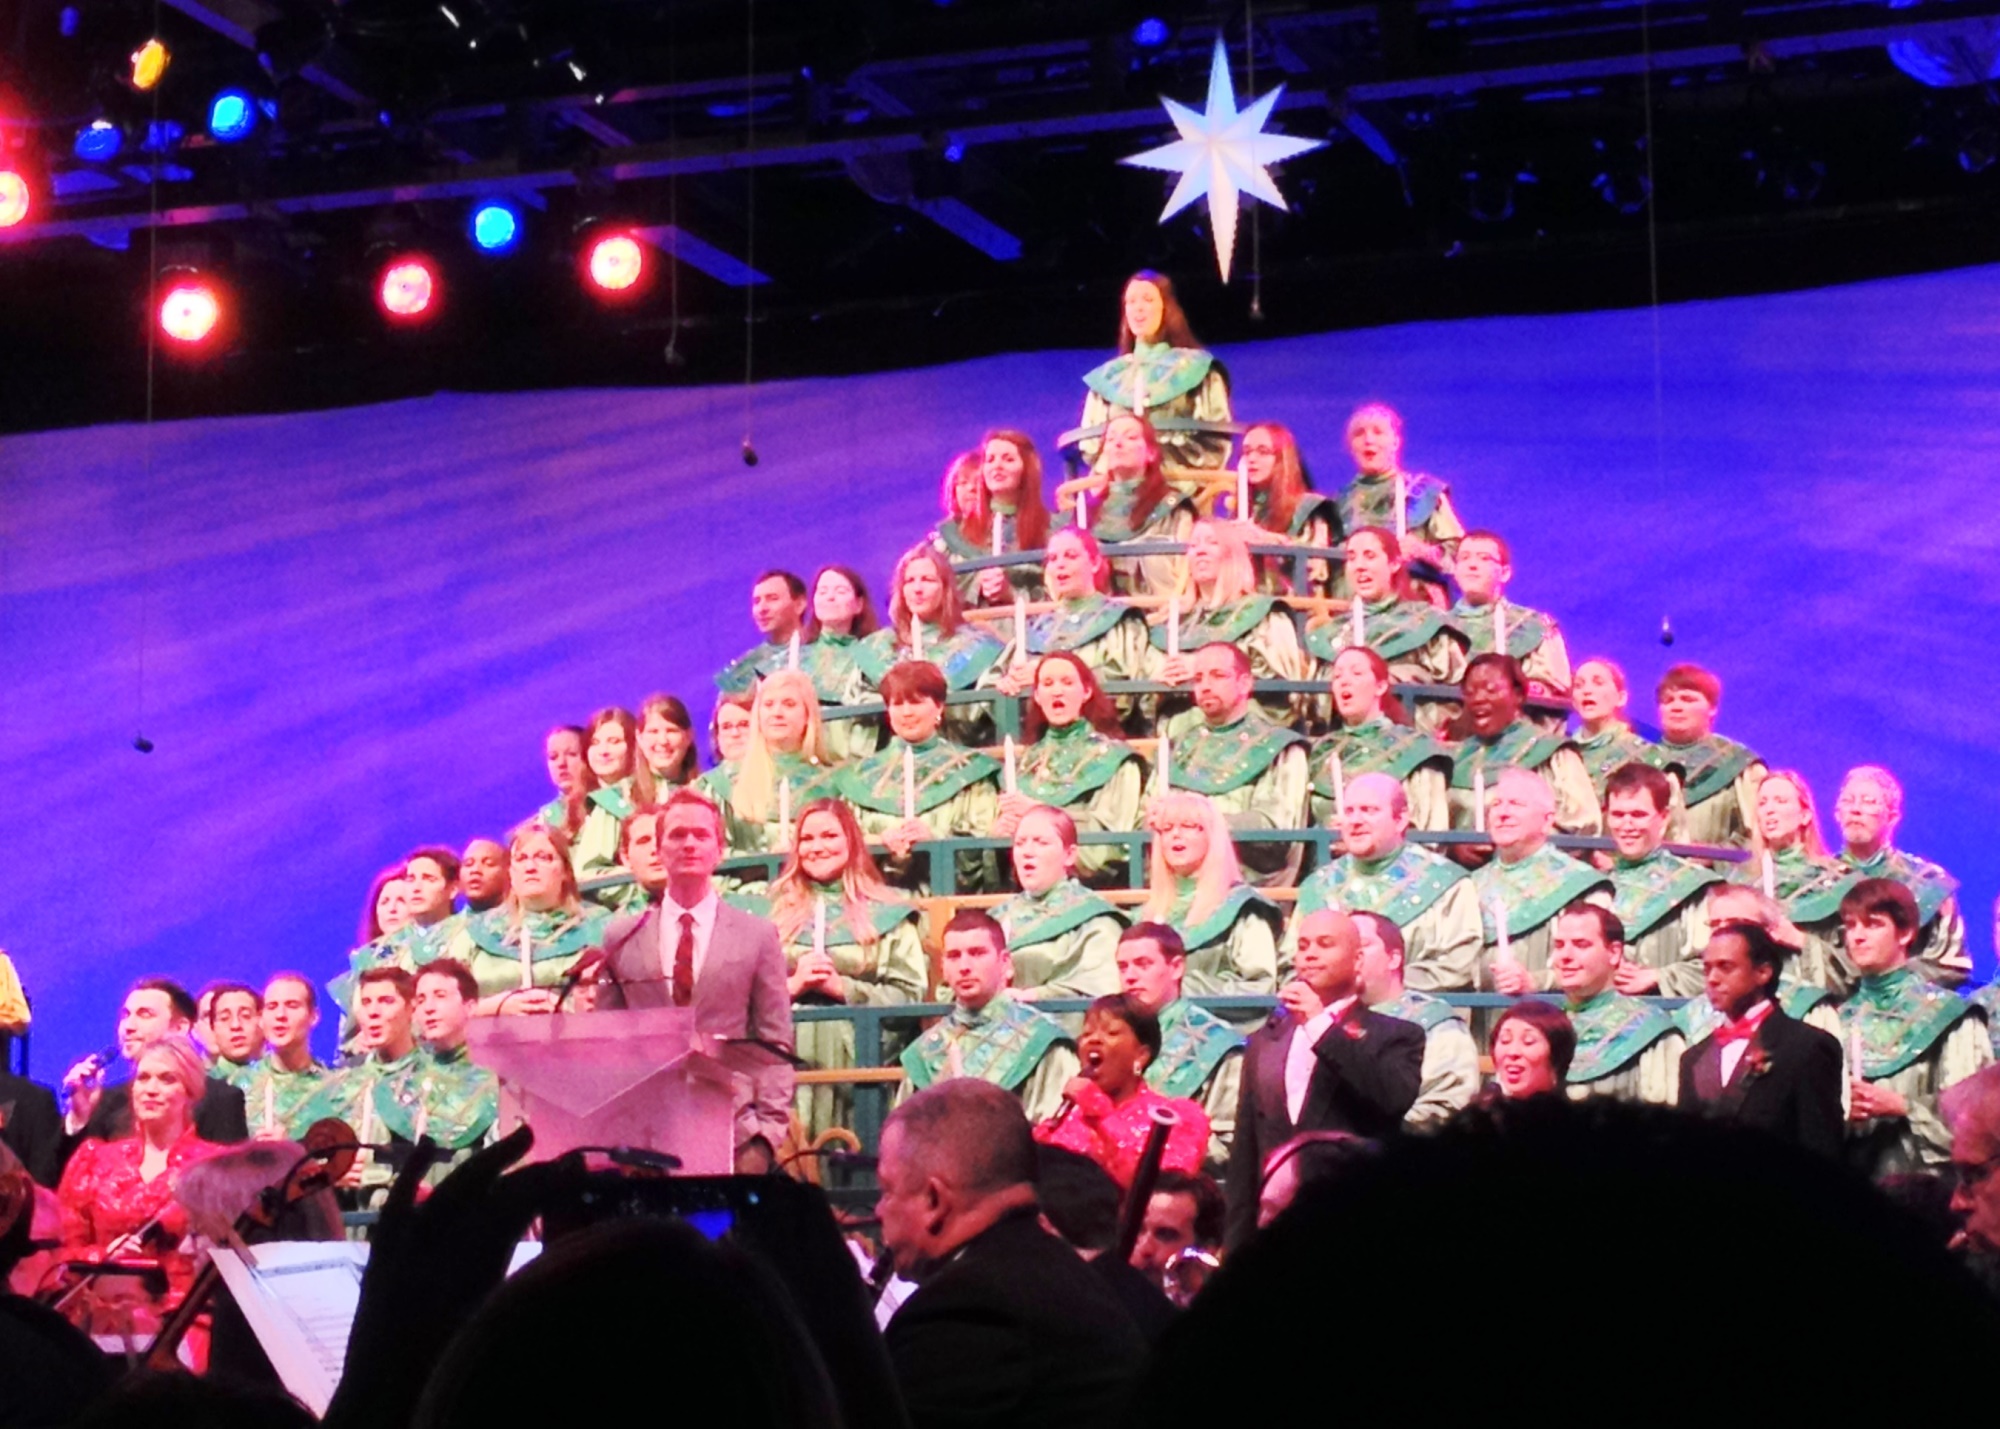 Epcot's Candlelight Processional An enchanting holiday event that